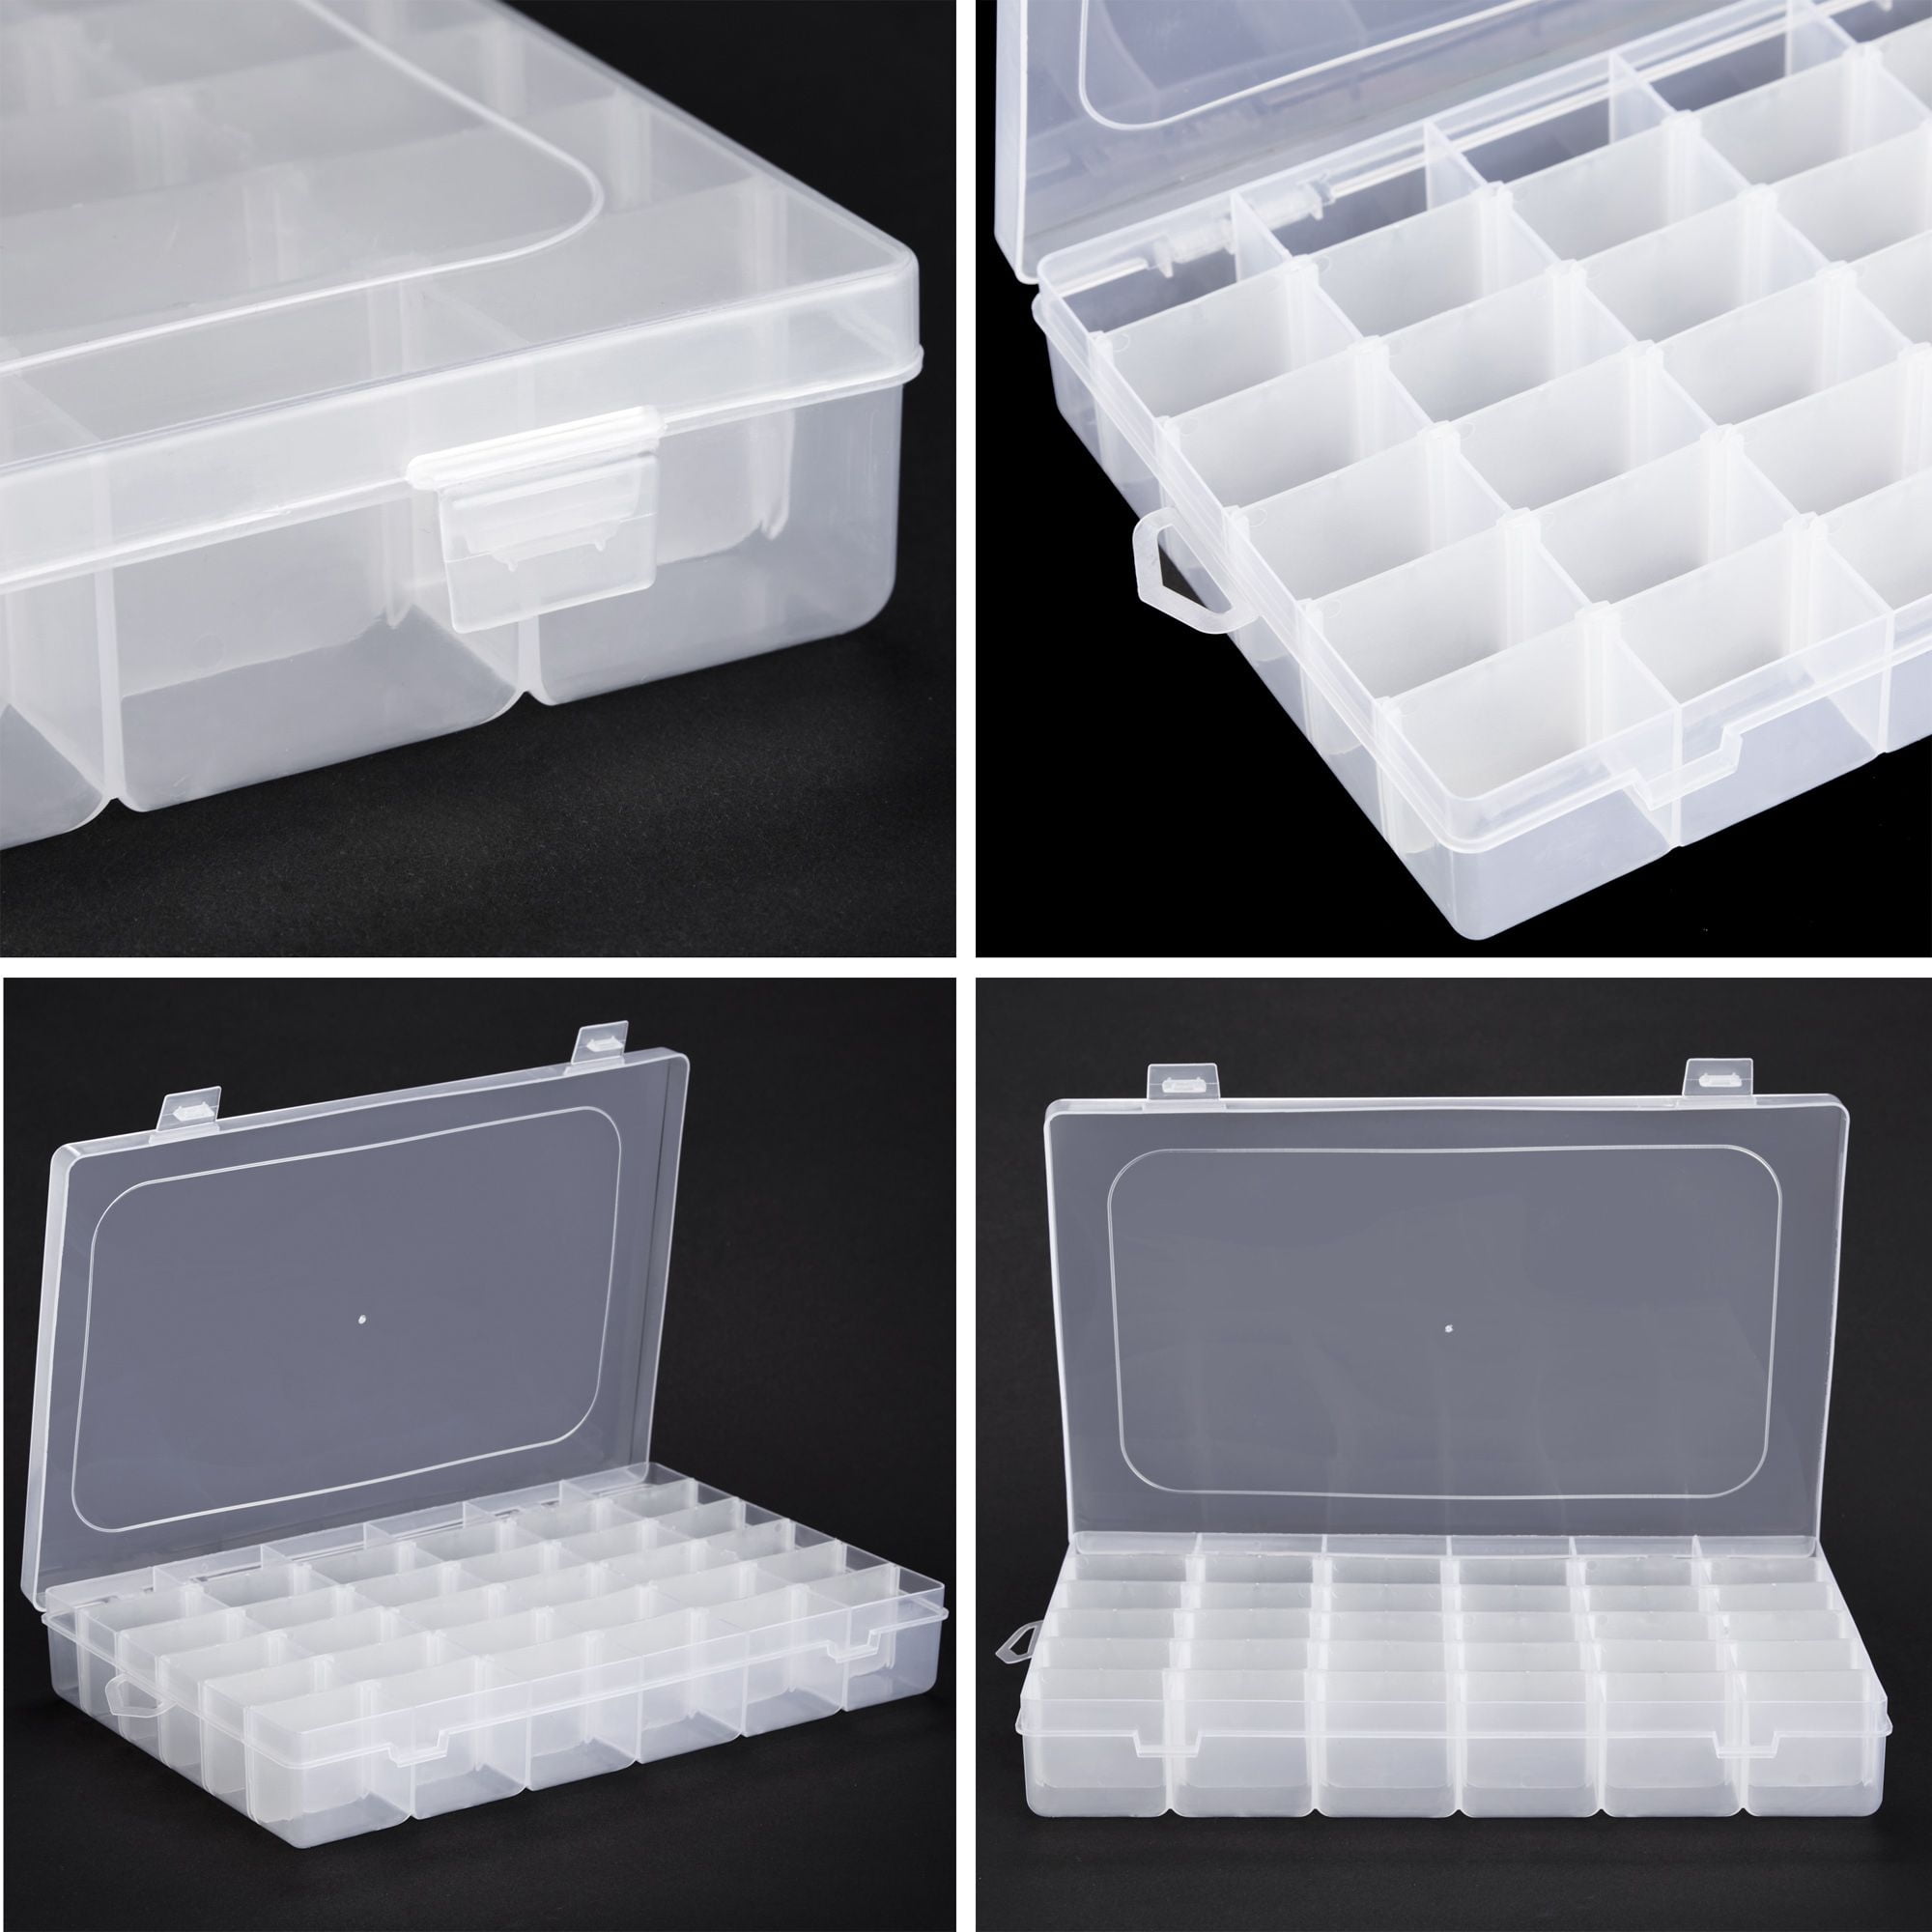  3 Sets Clear Plastic Storage Cases Small Beads